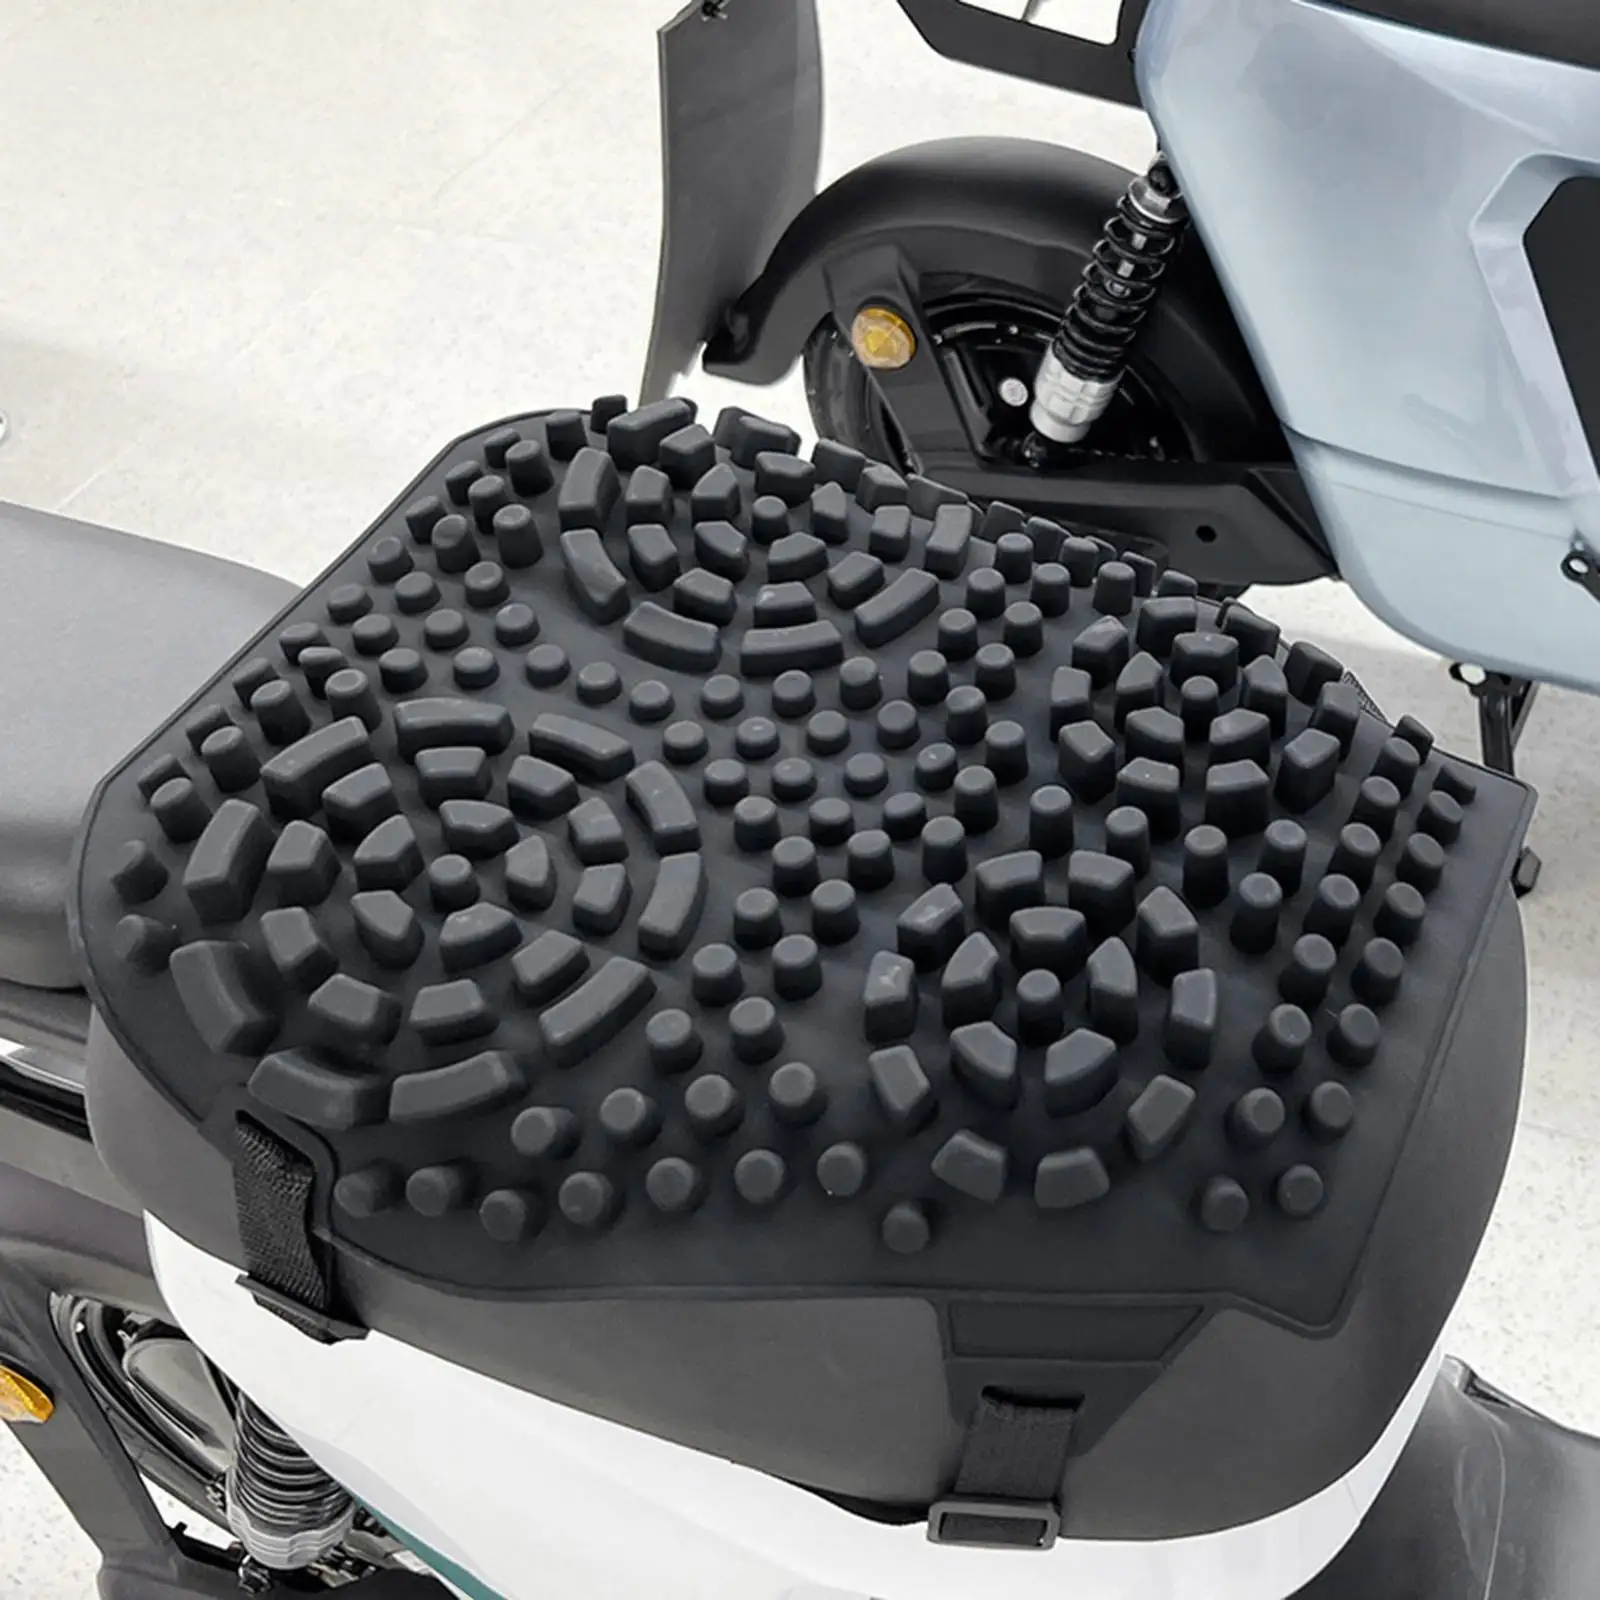 Motorcycle Seat Pad Cover Silicone Waterproof Shock Absorption Wear Resistant Accessory Protective Ride Saddle Breathable Soft